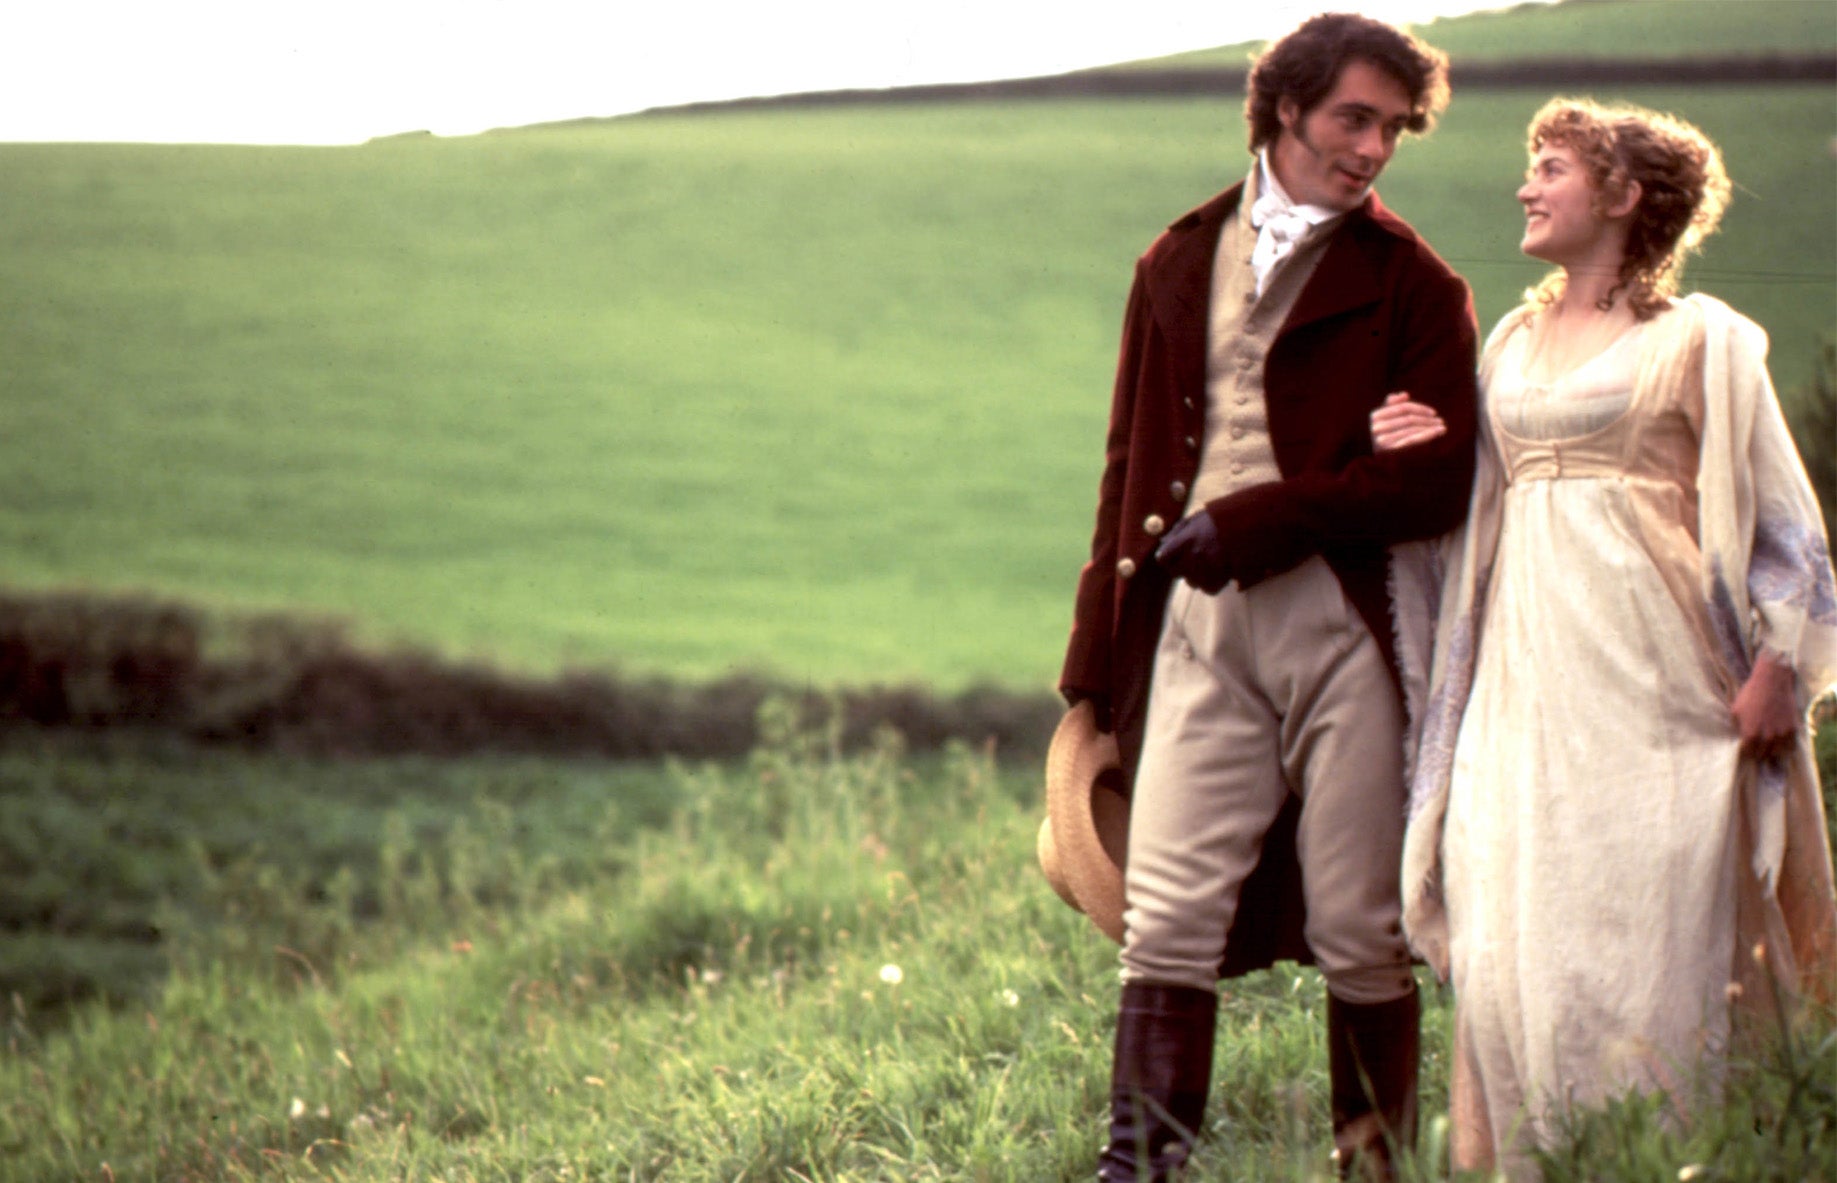 Kate Winslet and Greg Wise in ‘Sense and Sensibility’